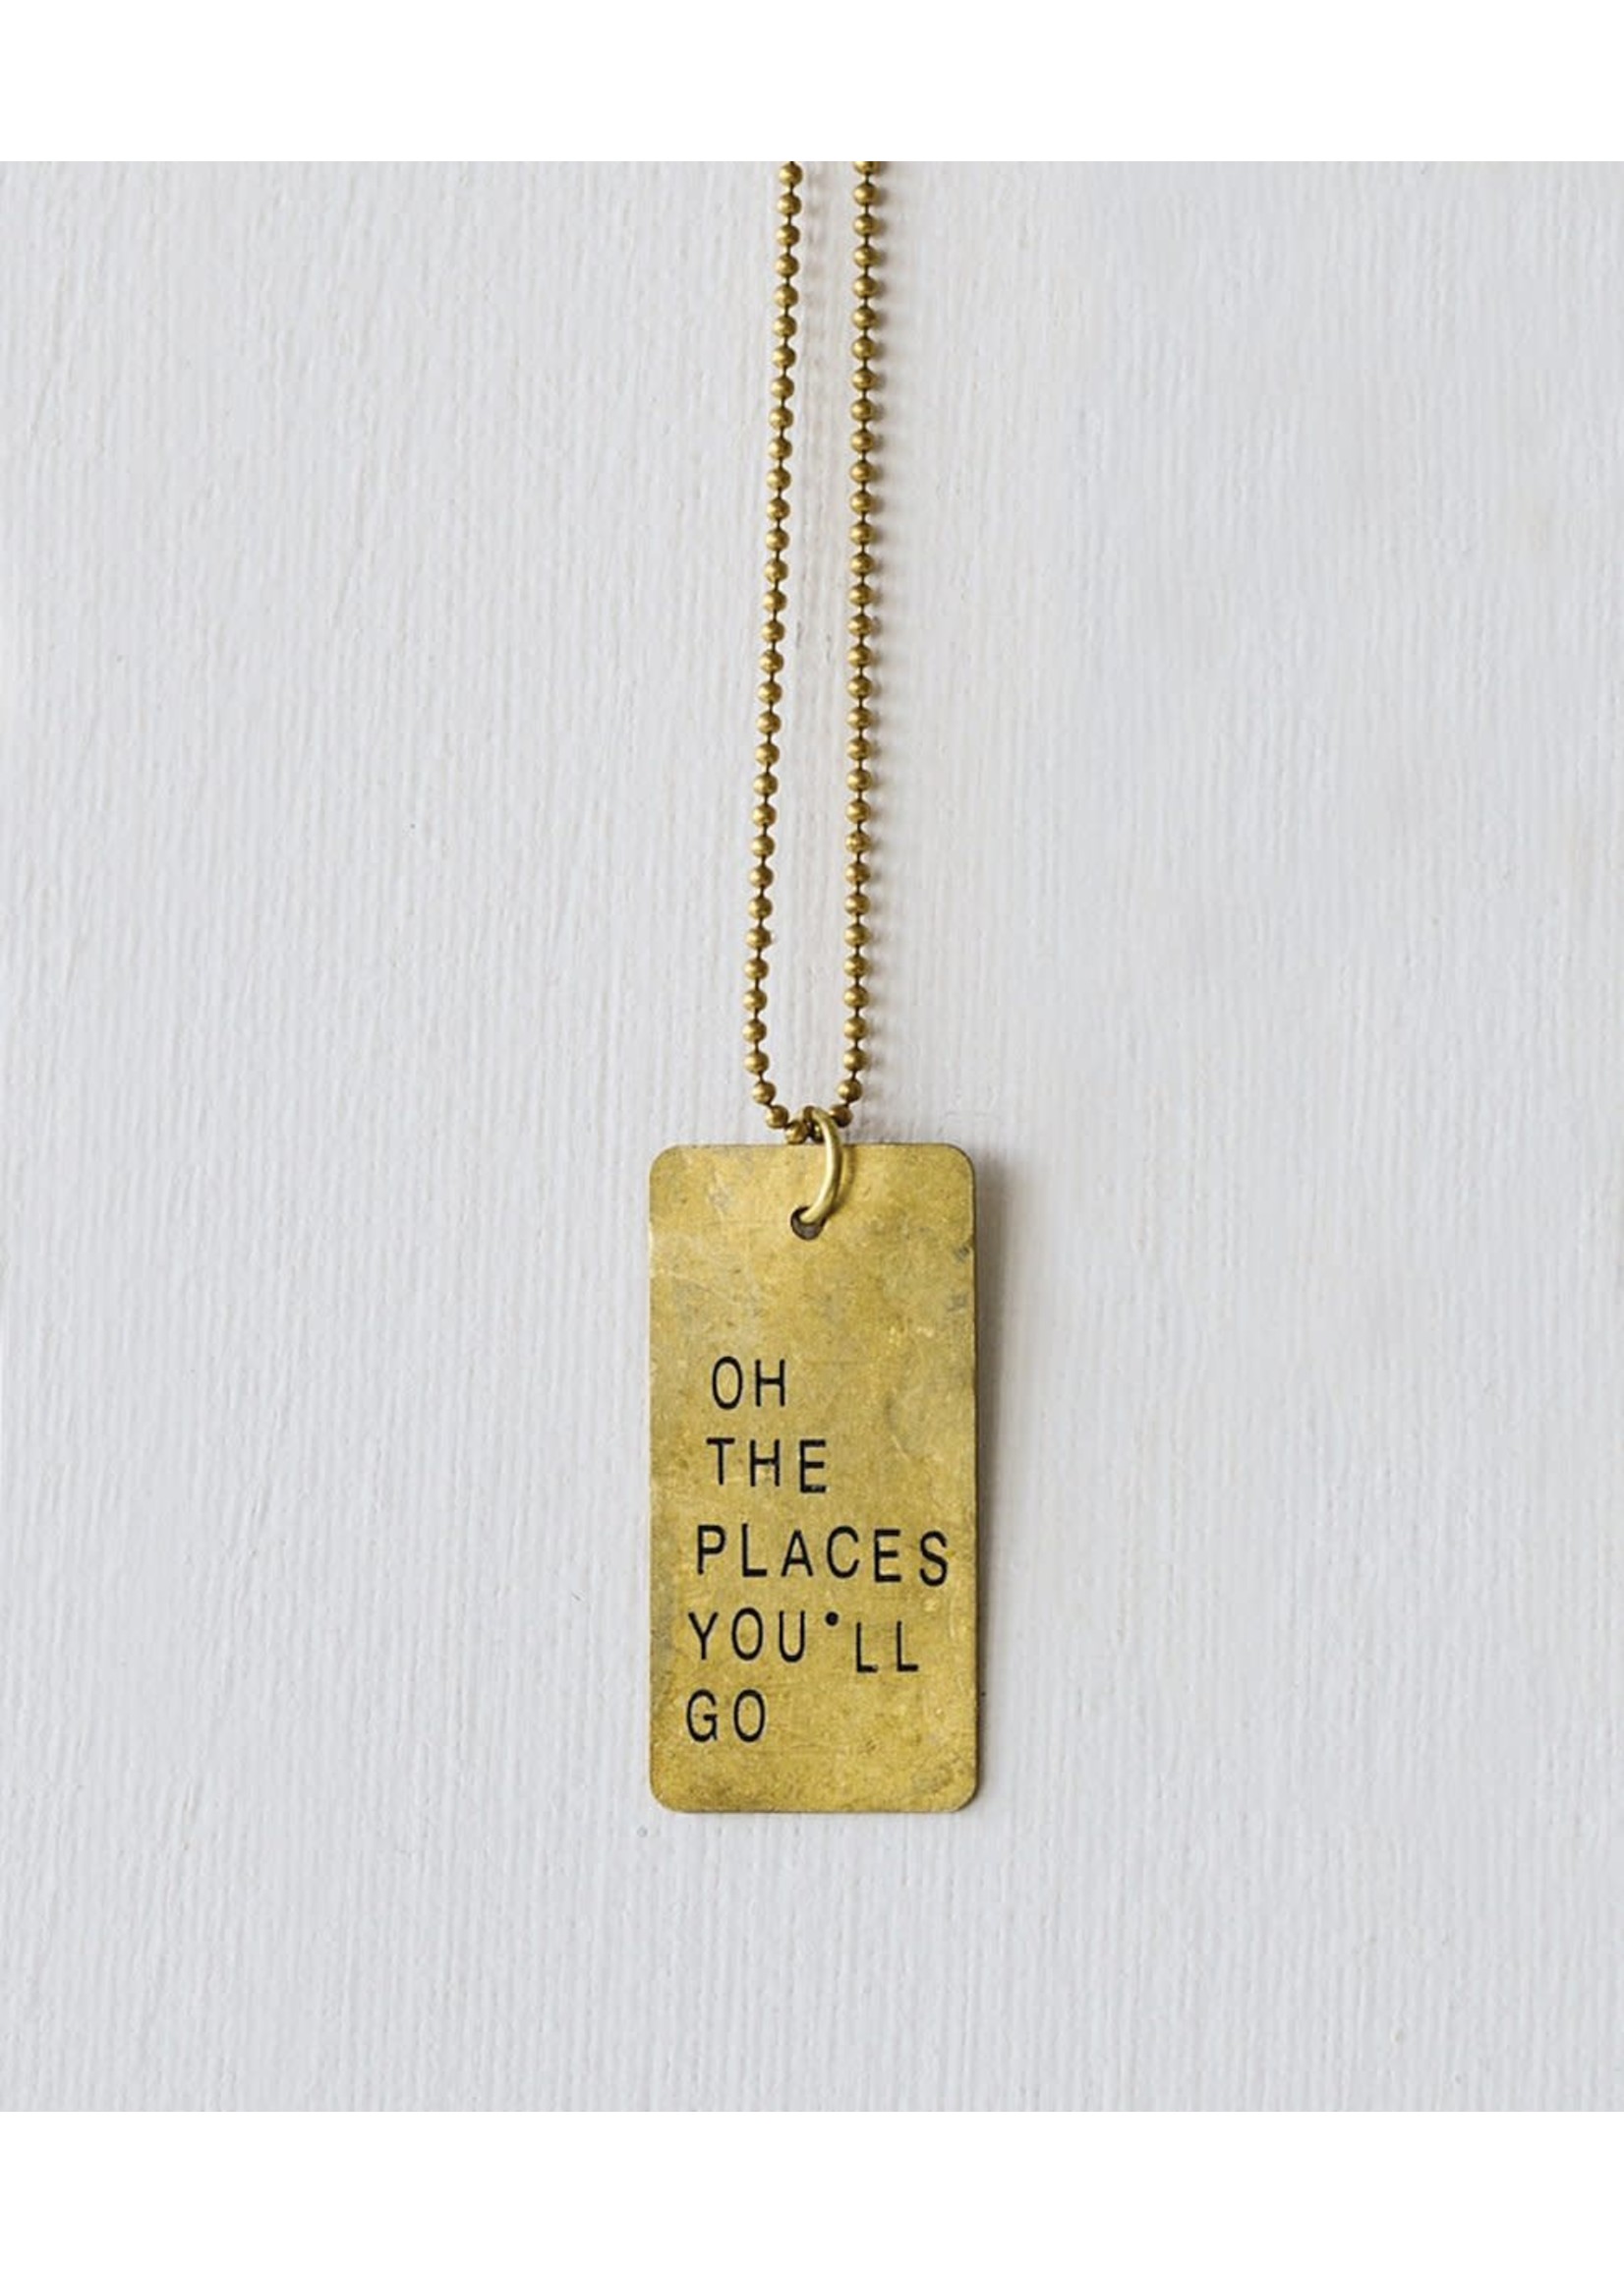 Copper and Metal Snarky Necklace "Oh The Places"